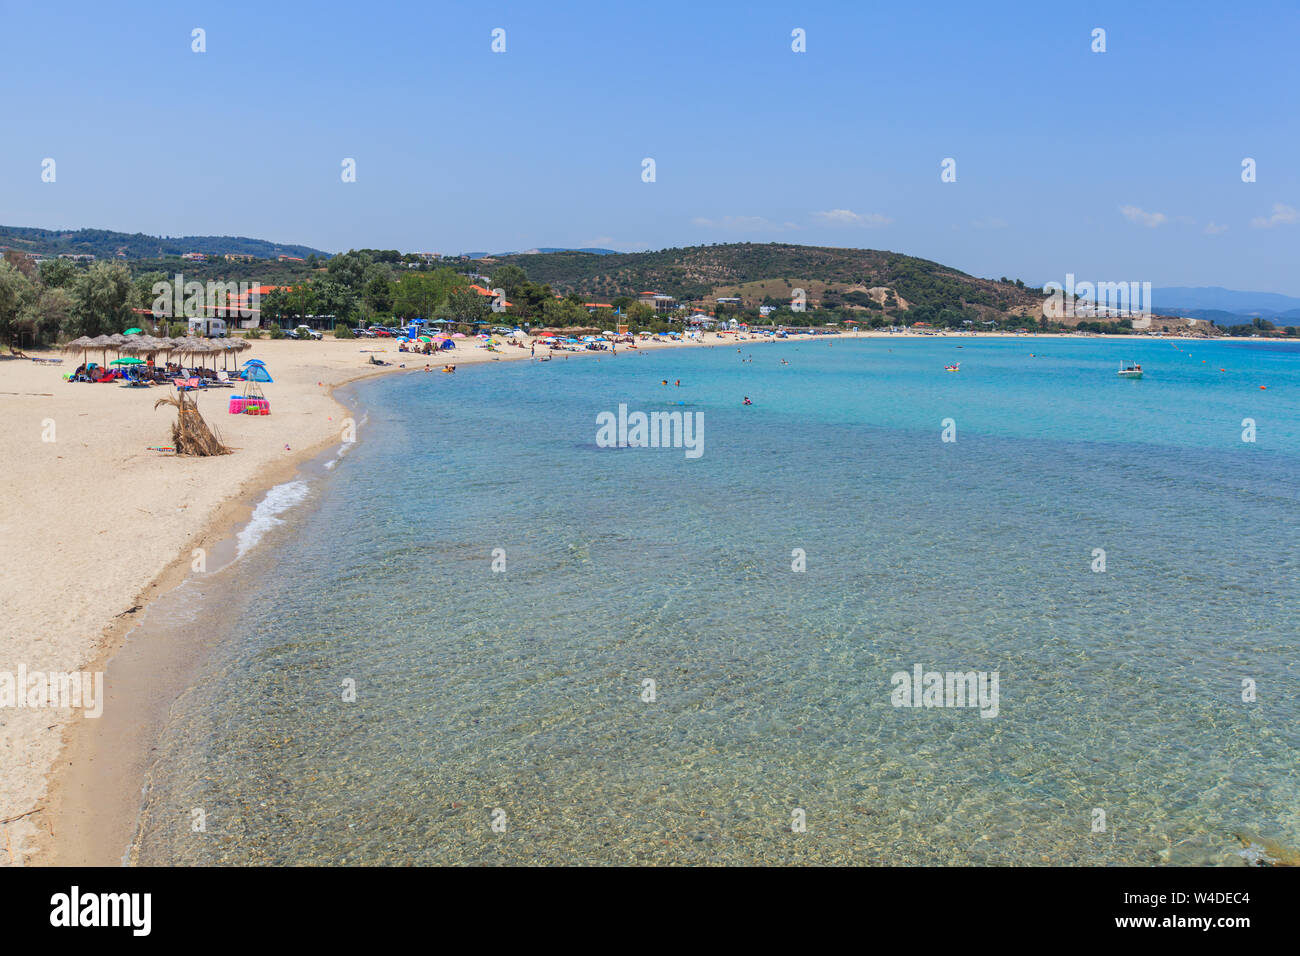 Page 3 - Sithonia High Resolution Stock Photography and Images - Alamy